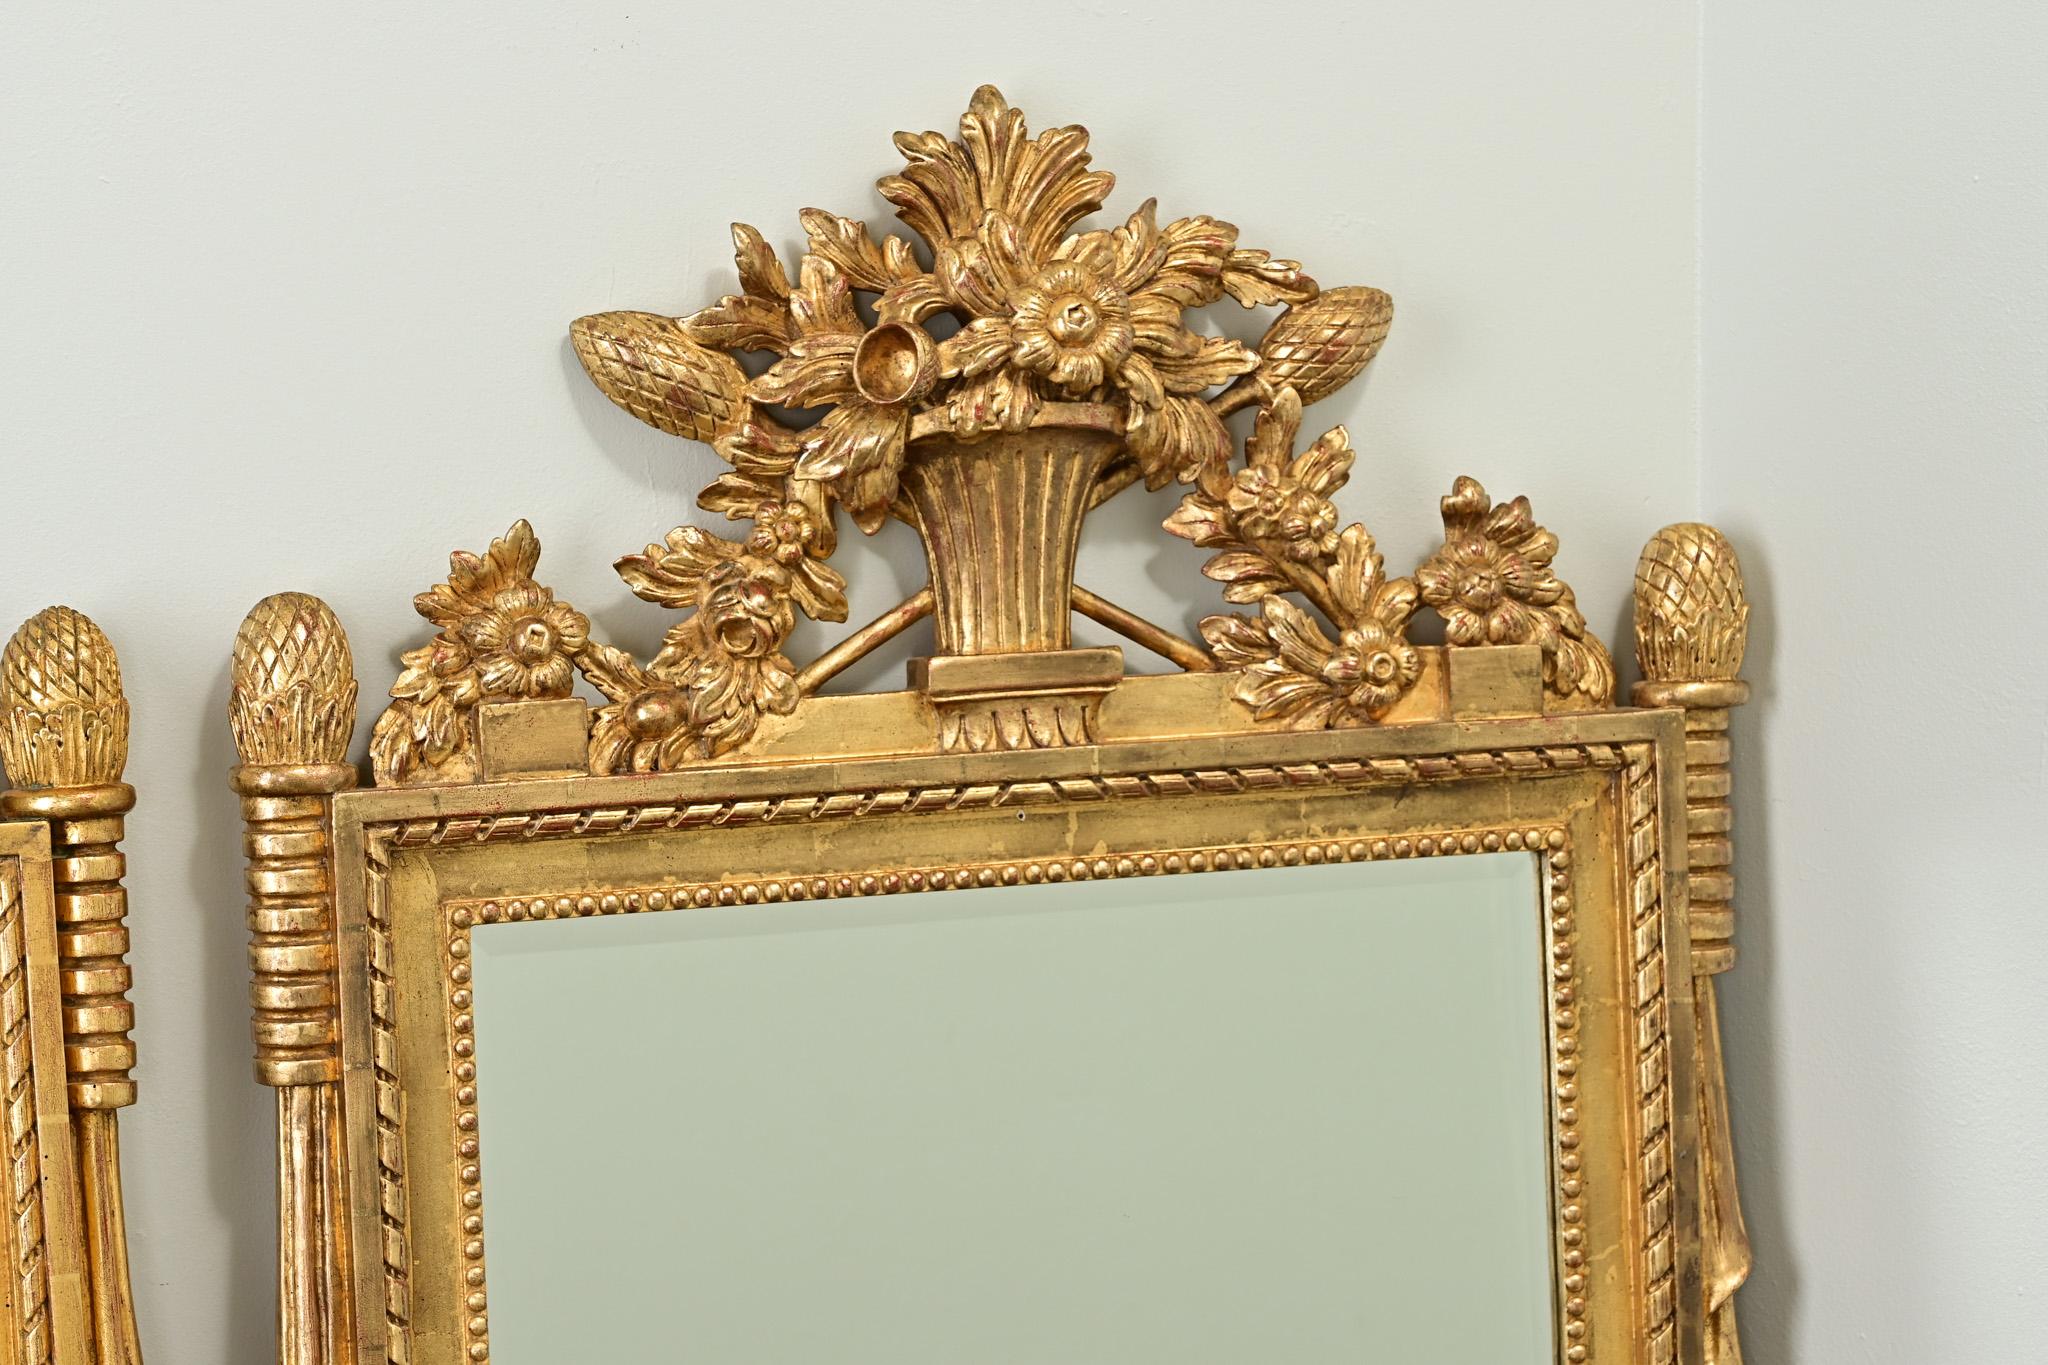 An impressive pair of reproduction gold gilt mirrors from Belgium. The frames are very decorative with crests of floral baskets and wheat. The new beveled mirror plates are surrounded with beading and other moldings typical of the Louis XVI style.